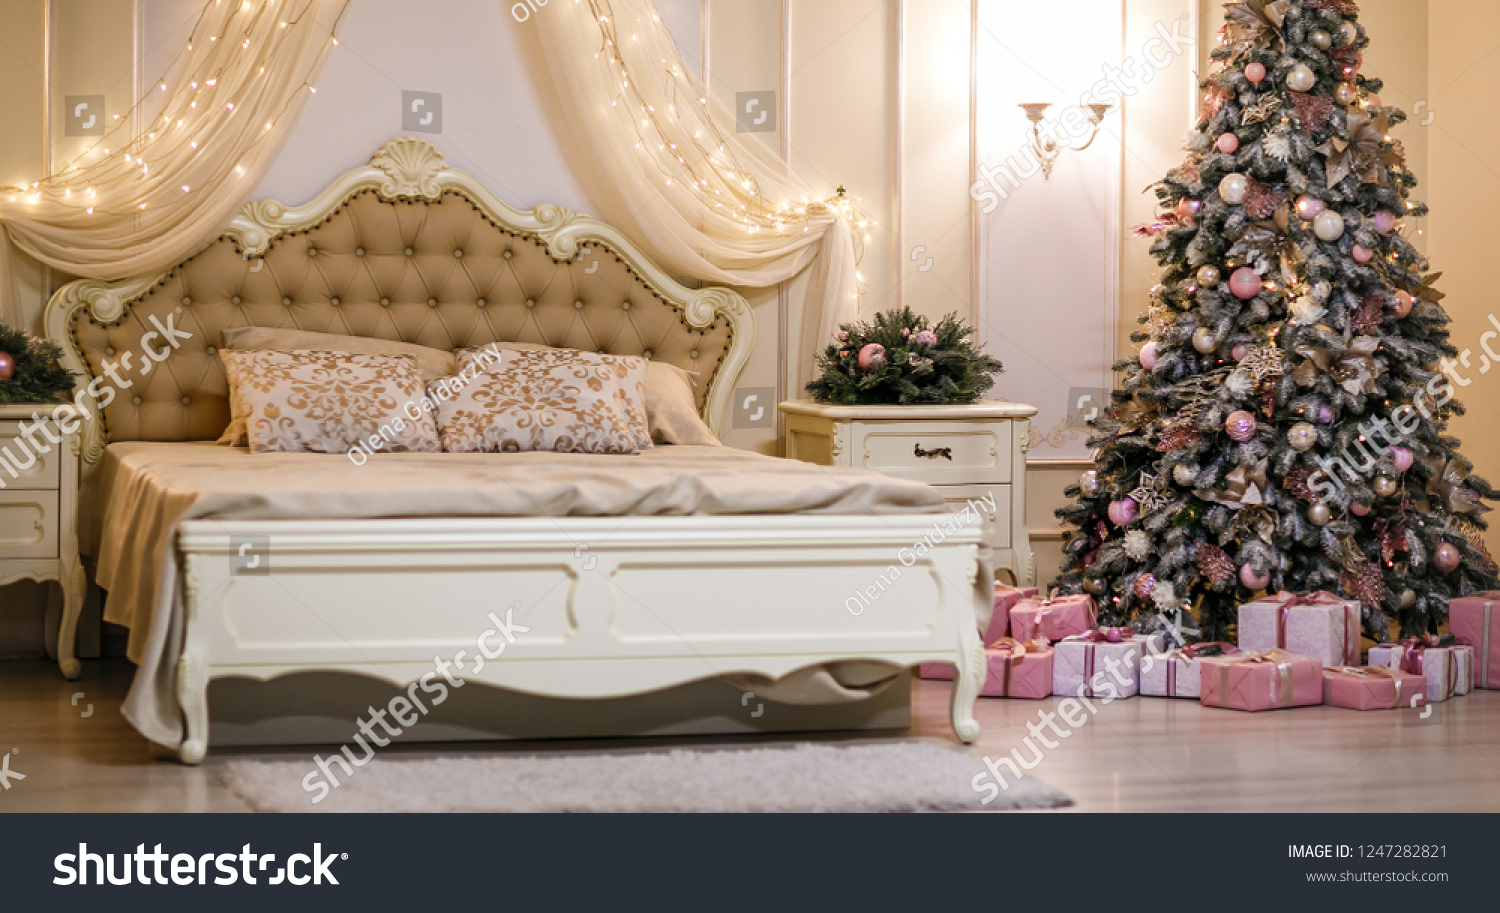 Bedroom with beige bed  and Christmas tree. Christmas interior. #1247282821